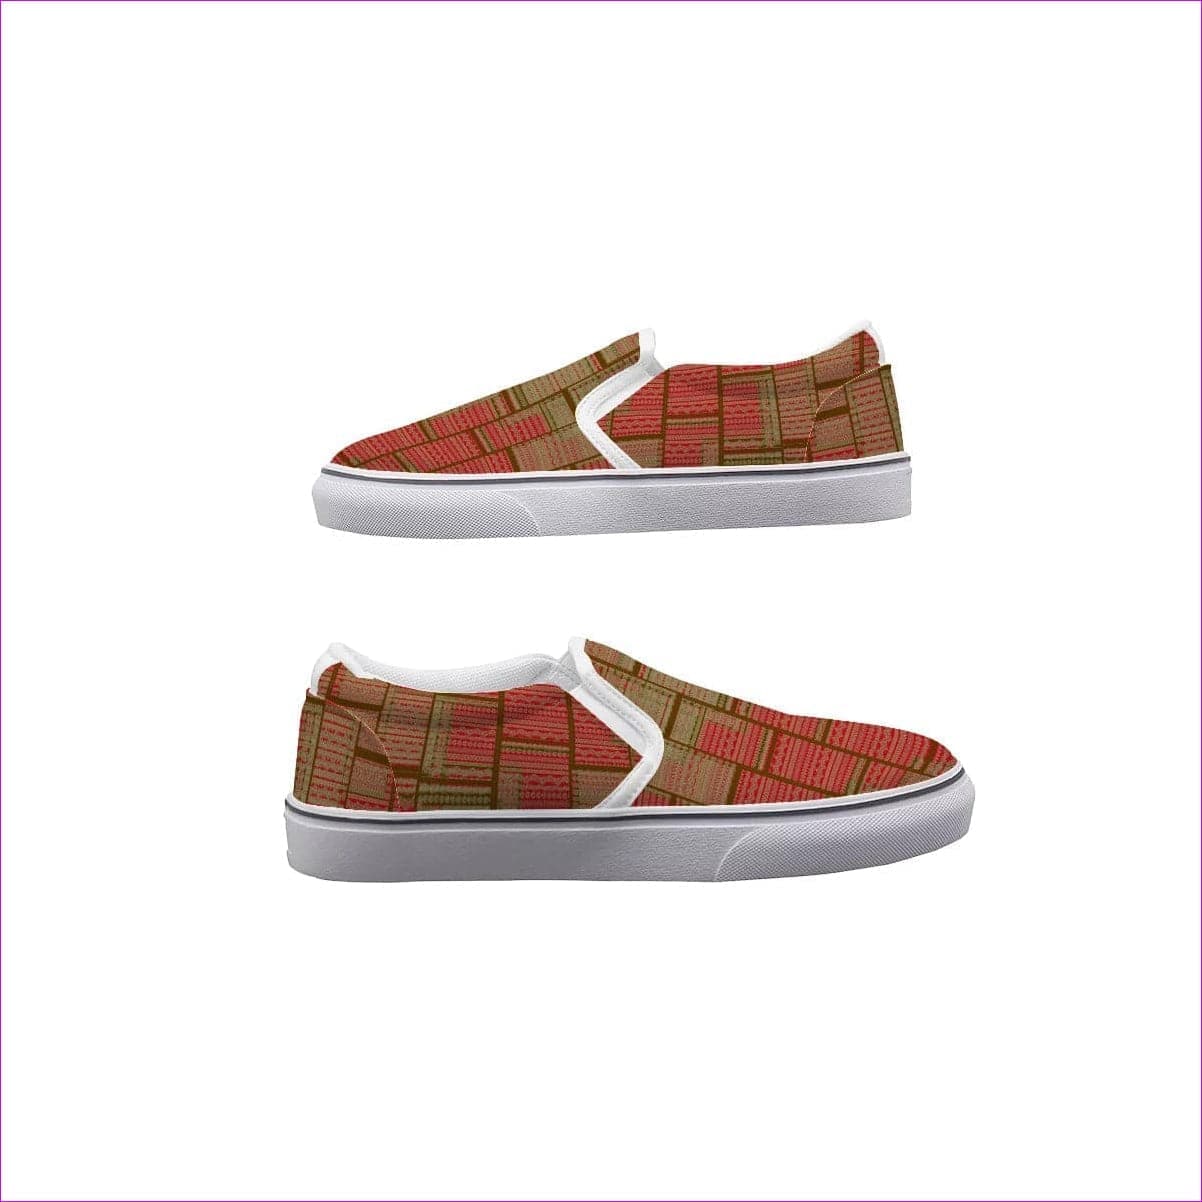 Chained 2 Womens Slip On Sneakers - women's slip-on sneakers at TFC&H Co.